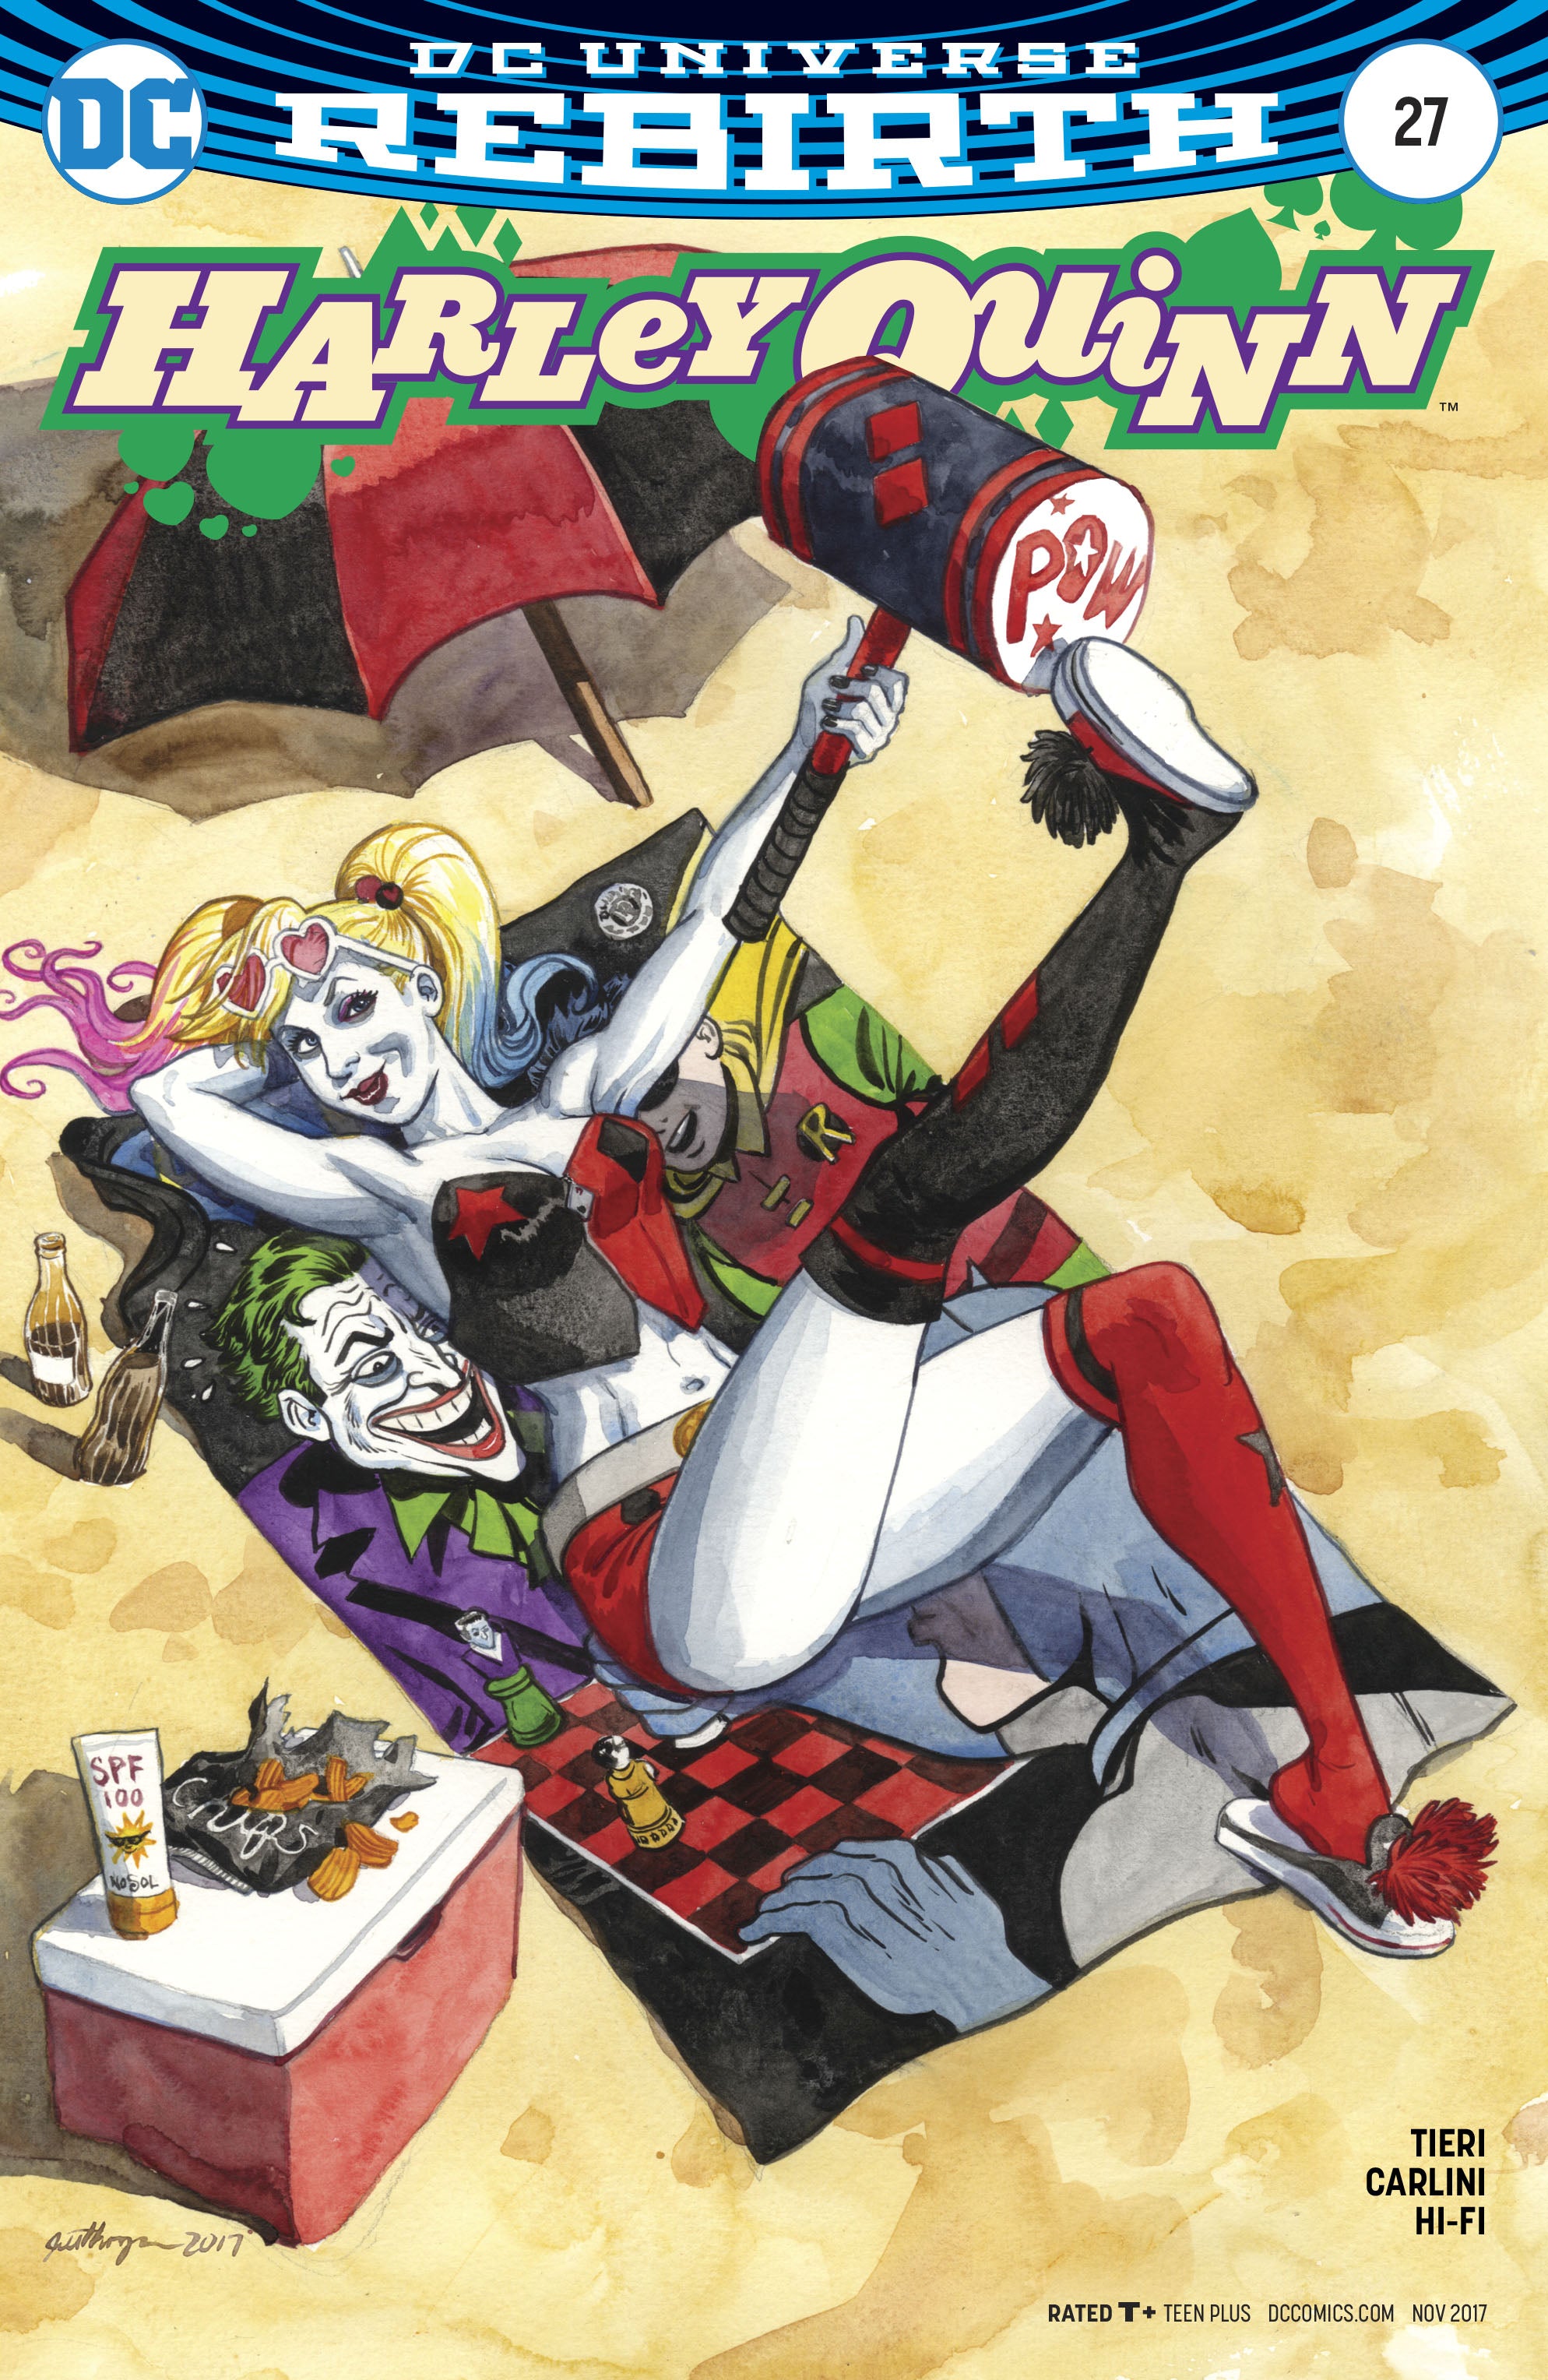 HARLEY QUINN Vol 3 #27 | Game Master's Emporium (The New GME)